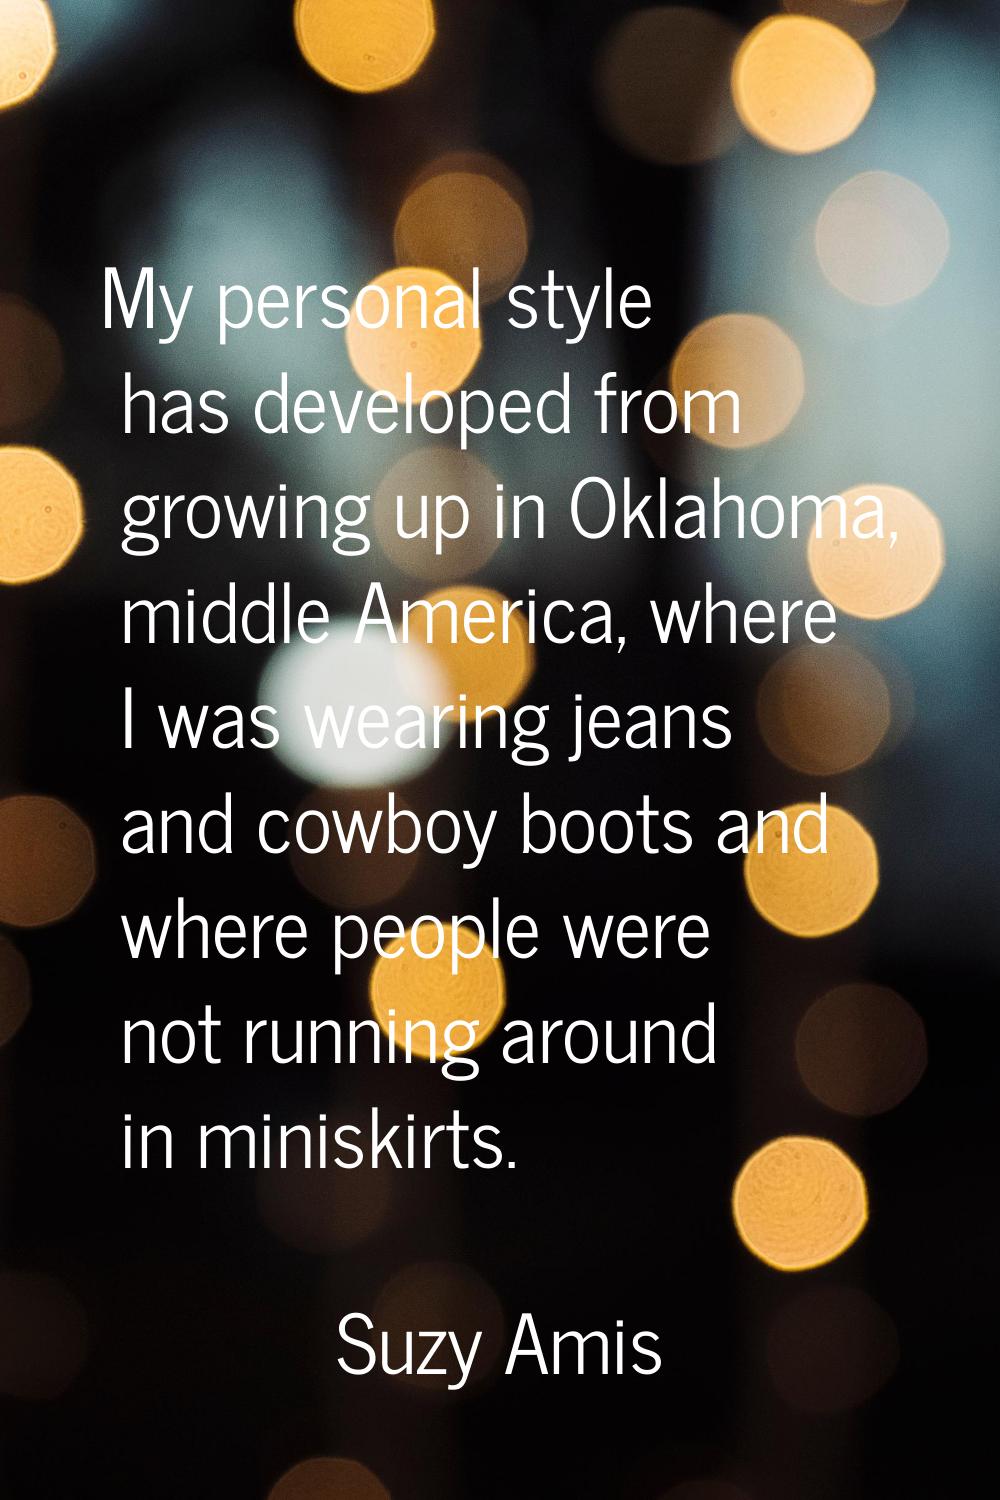 My personal style has developed from growing up in Oklahoma, middle America, where I was wearing je